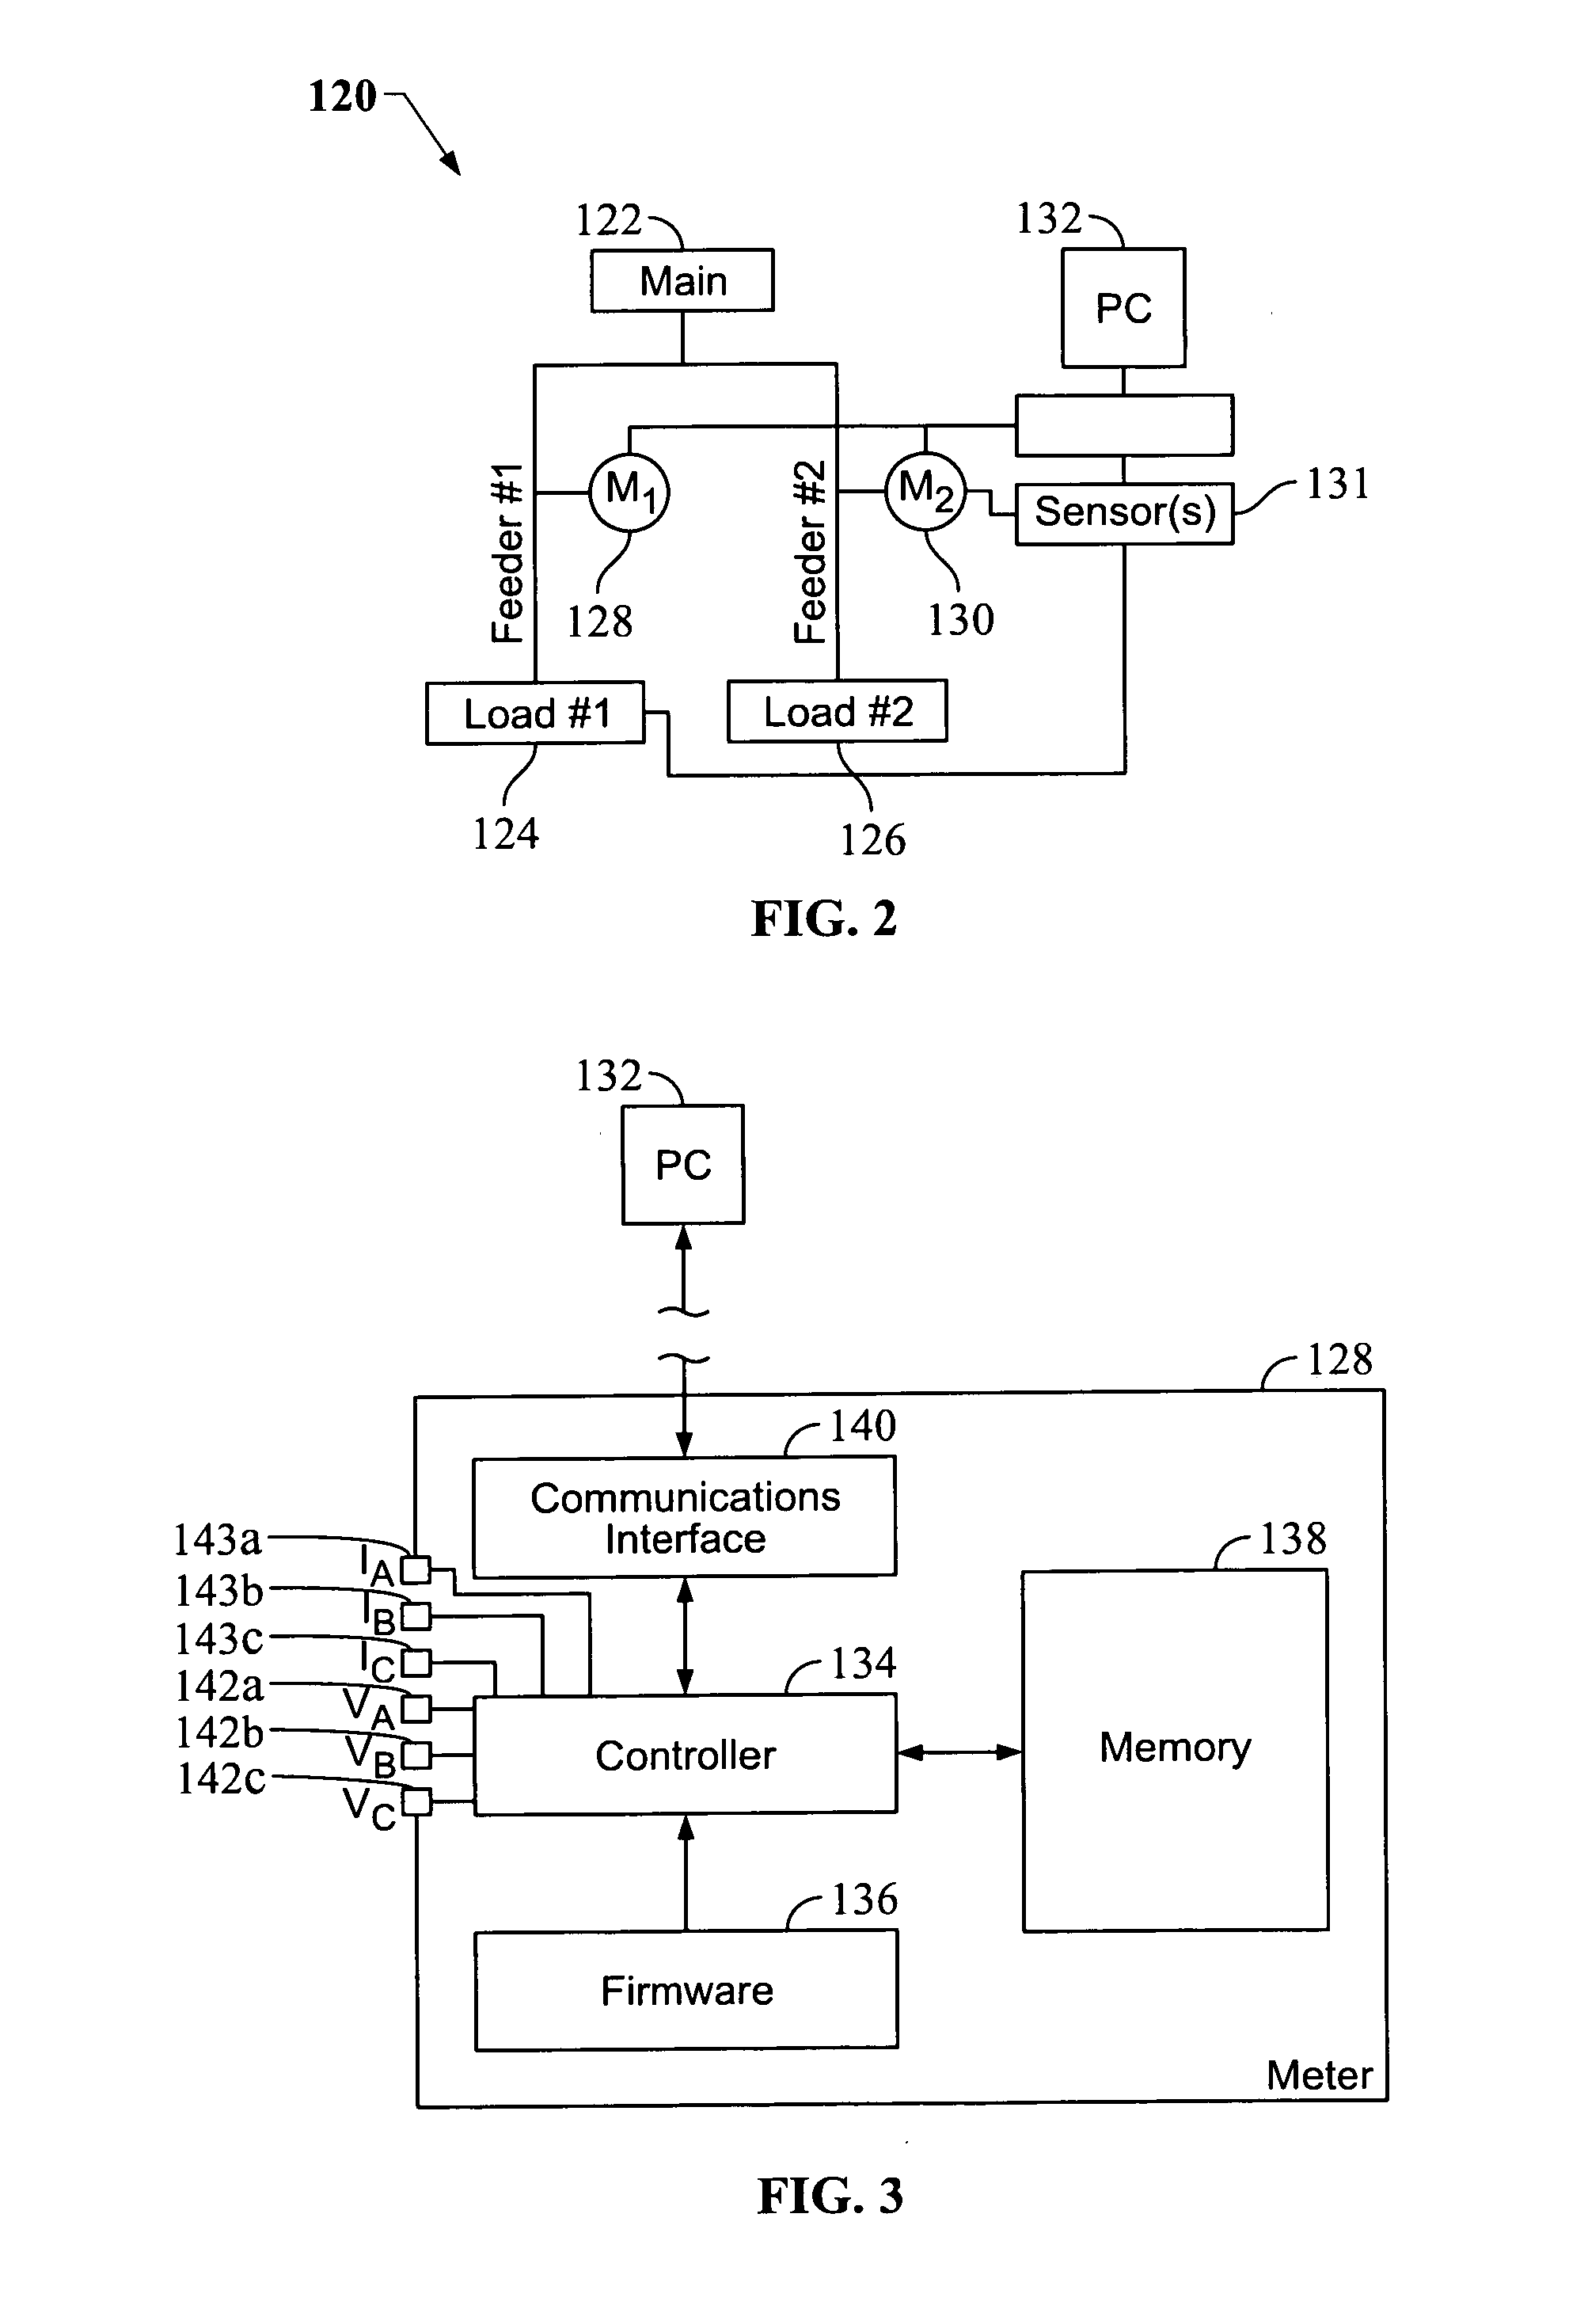 Method for process monitoring in a utility system